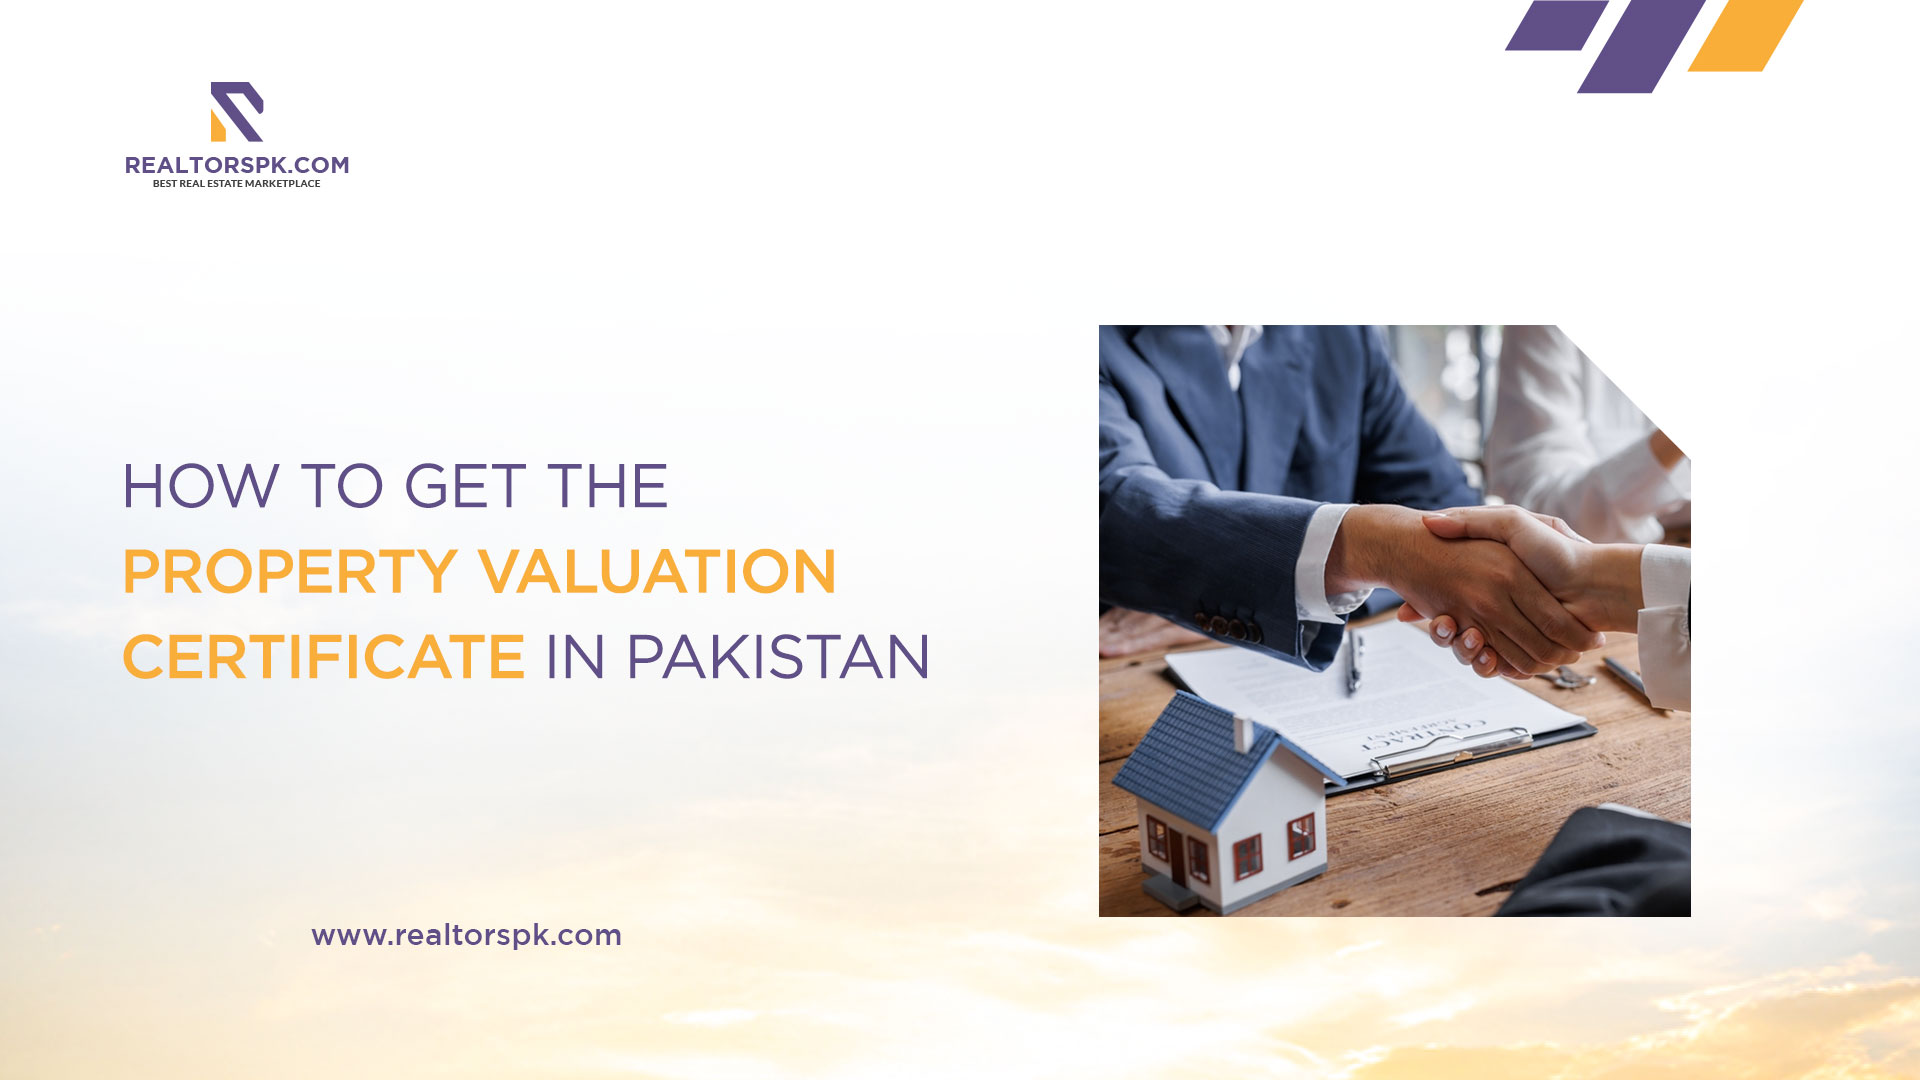 How to get the property valuation certificate in Pakistan